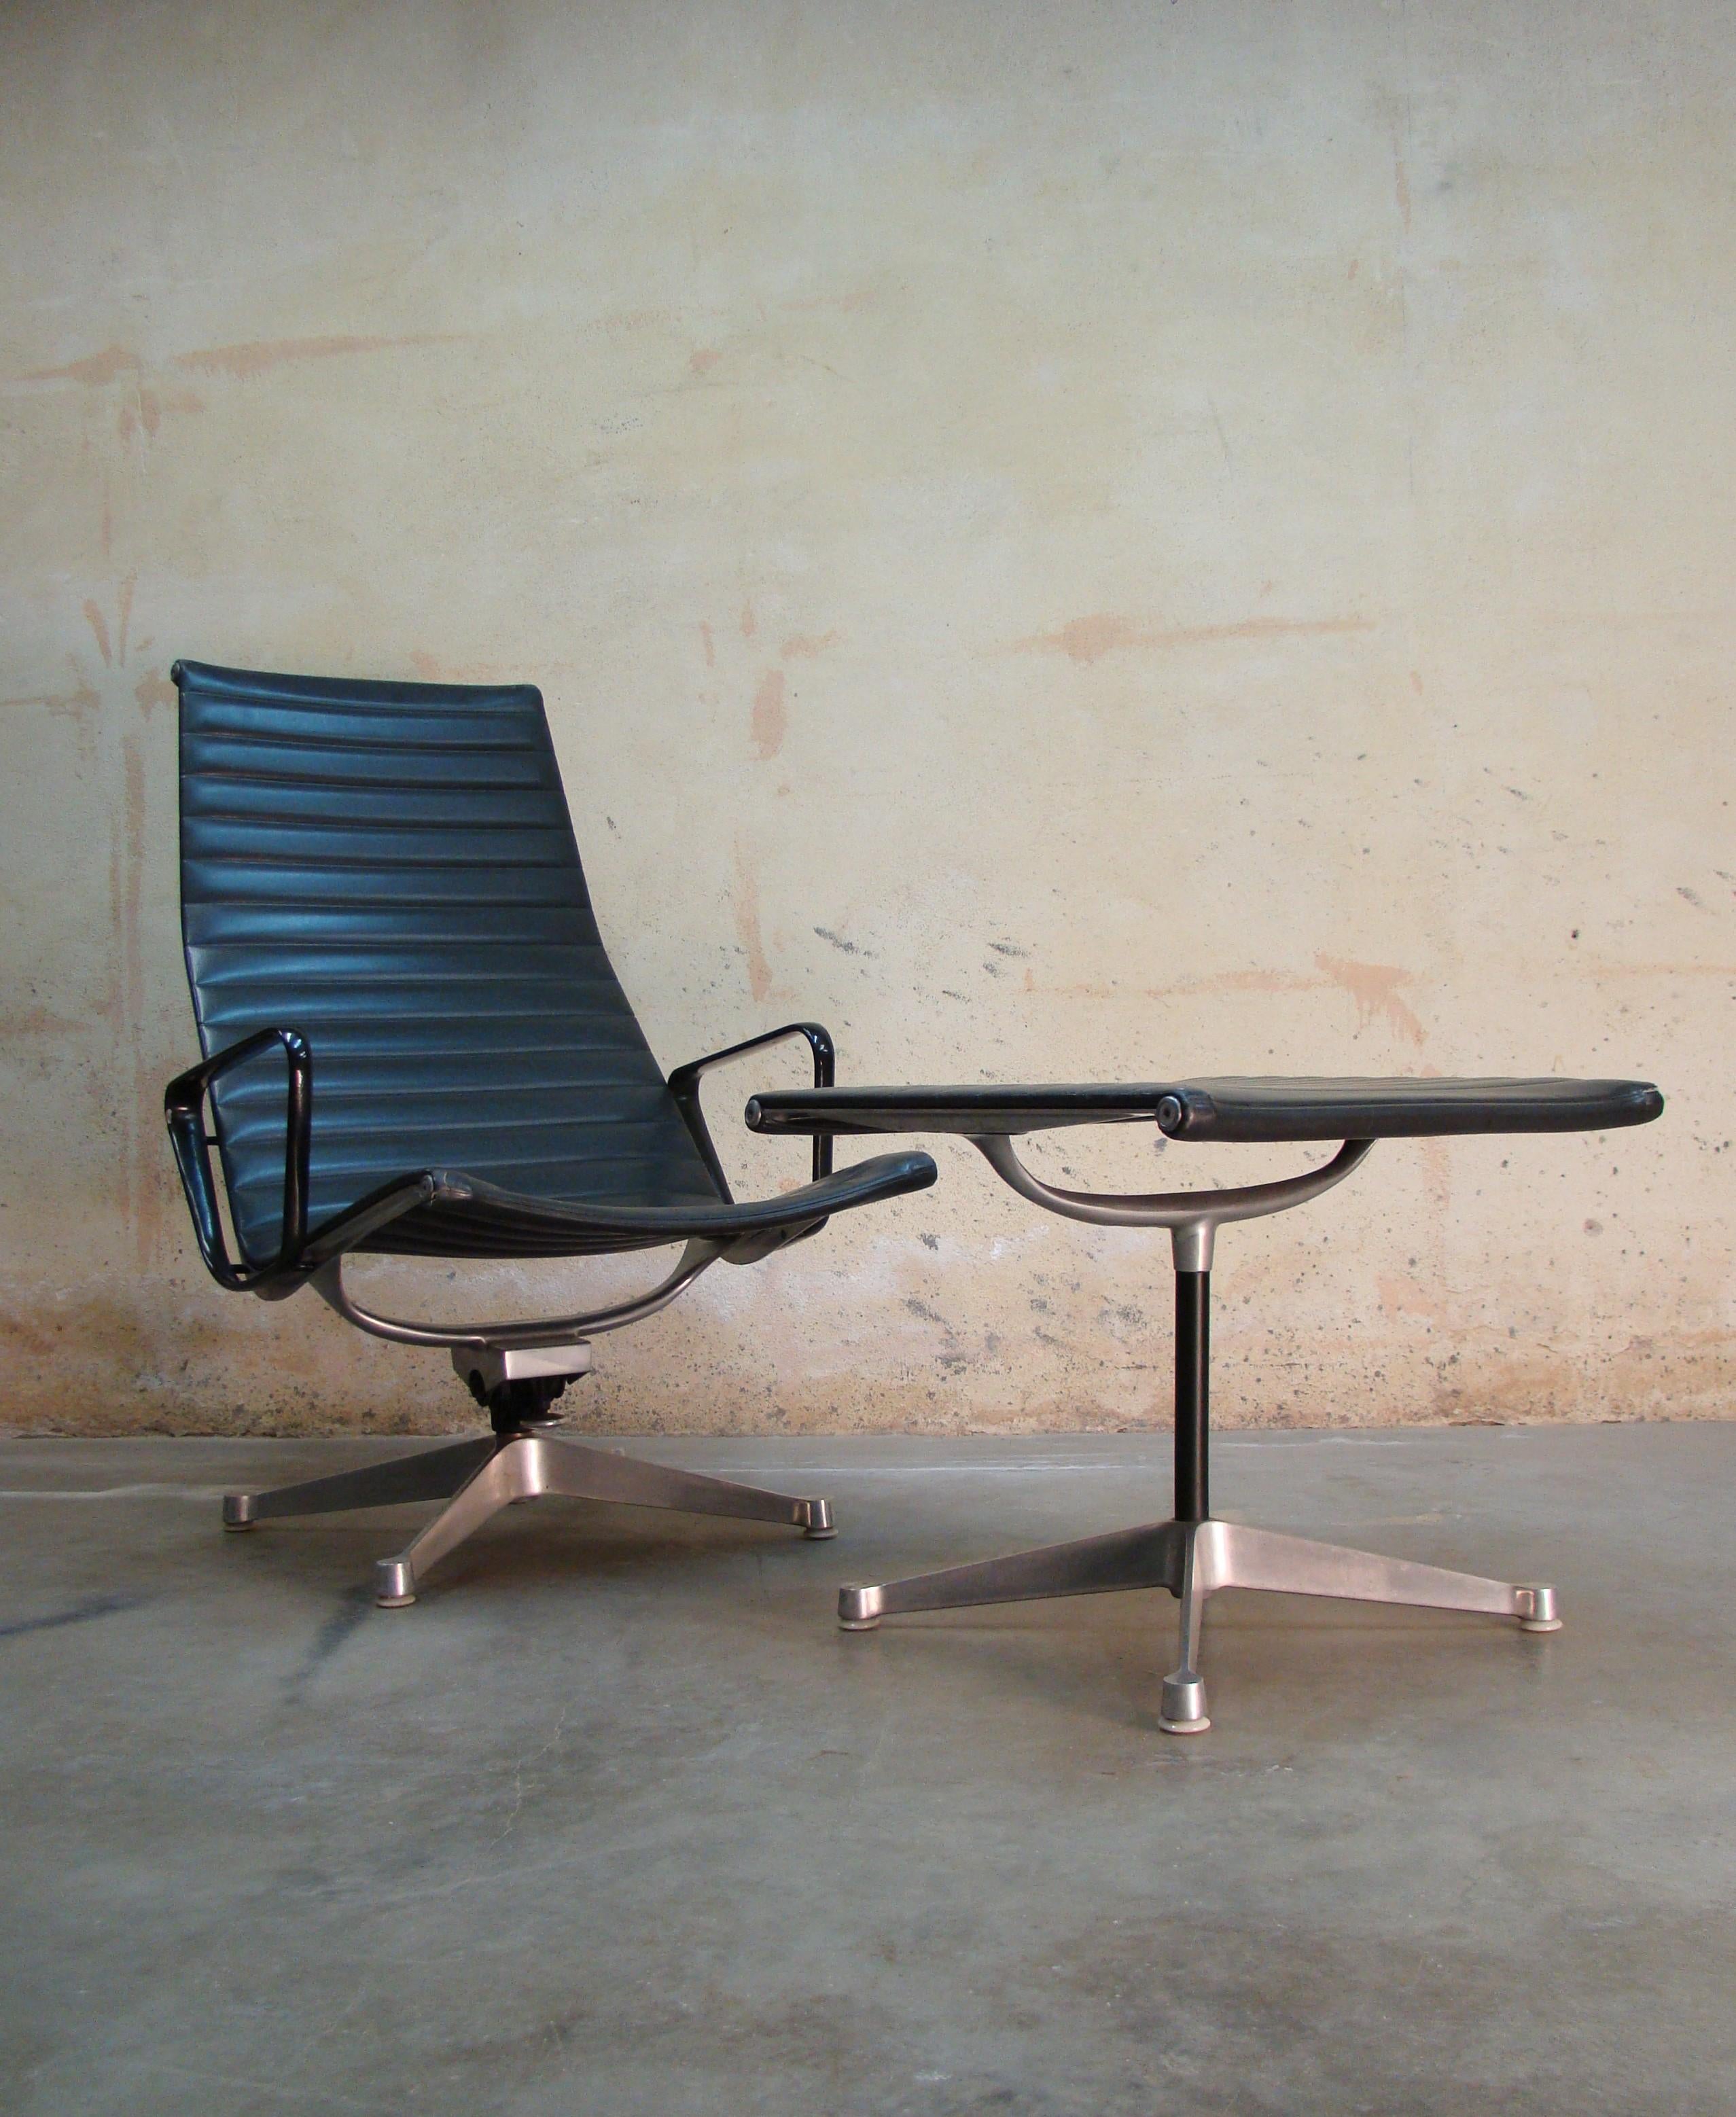 This is an early example, likely from the mid-1960s. As beautiful as later versions have become in their evolution, there remains a distinct quality in the early chairs as furniture design directly reflected the contemporary modern architecture.